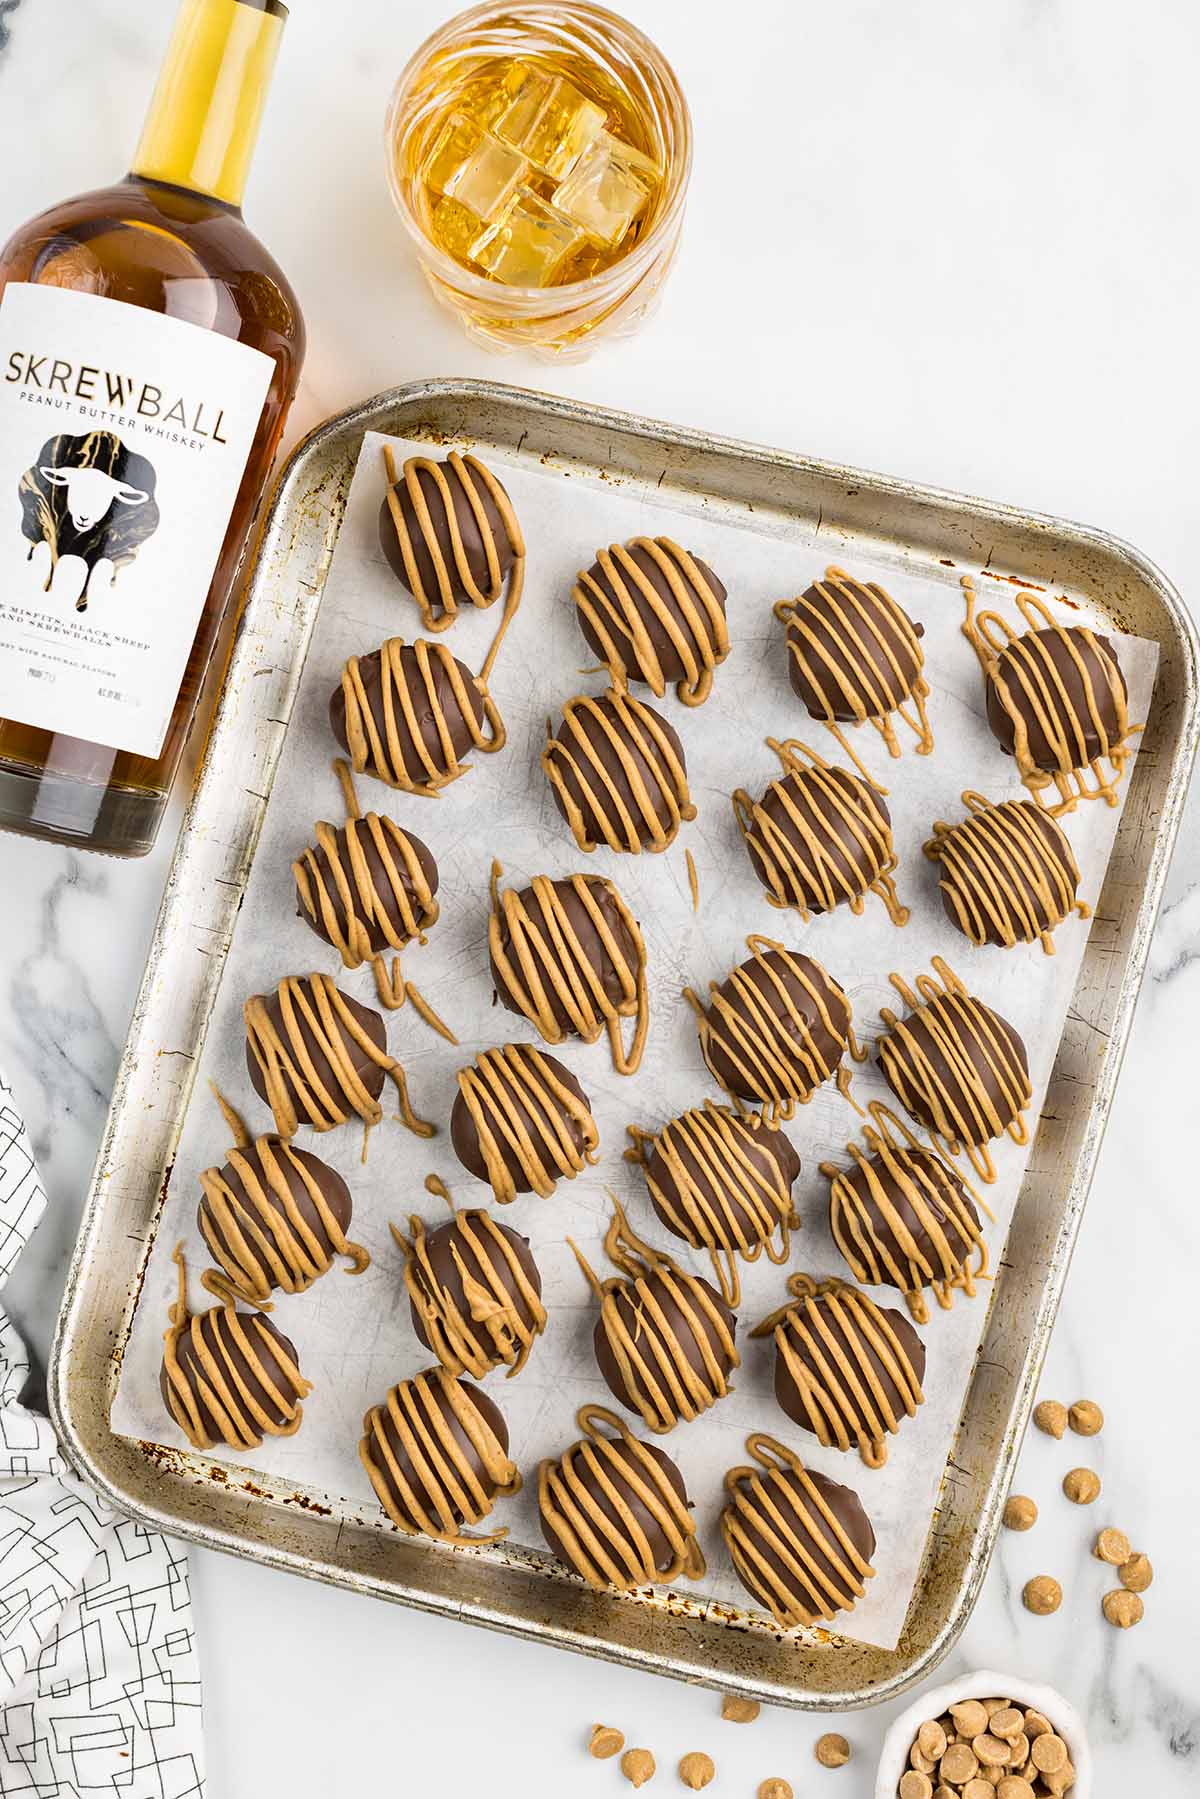 Whiskey Balls on a baking sheet with a bottle of Screwball whiskey beside it.